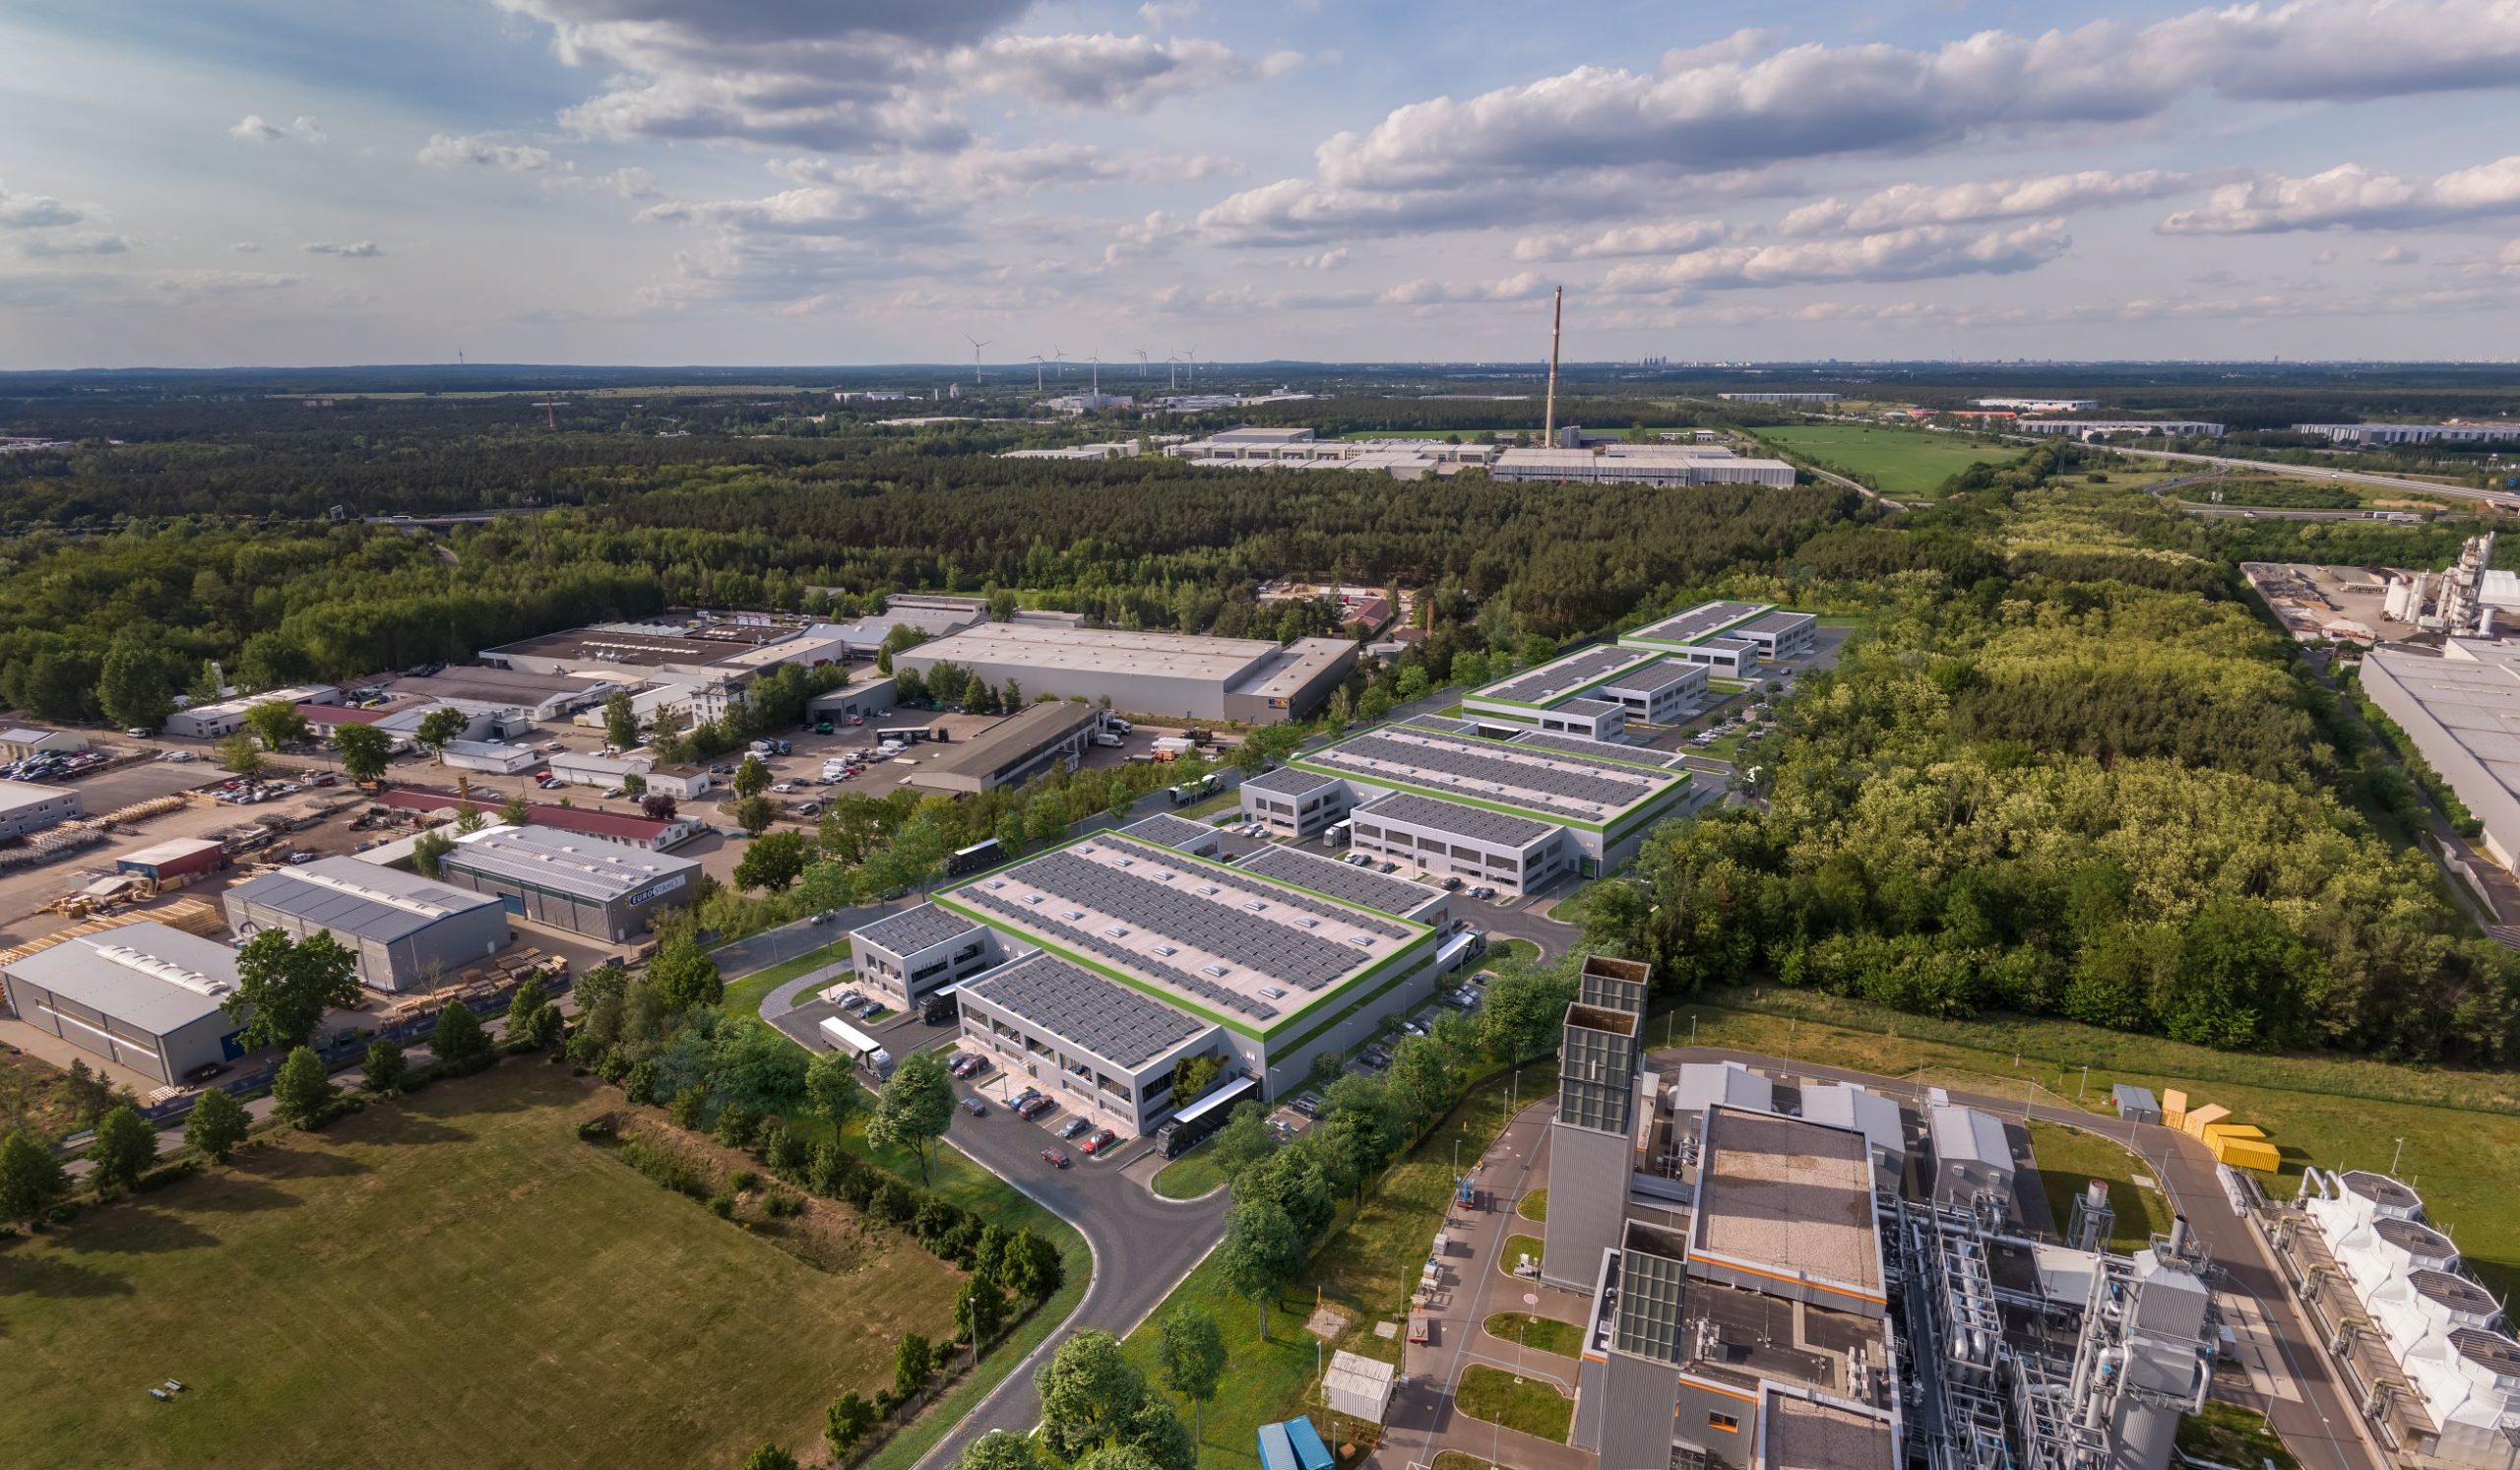 FIRST LETTING OF 2,900 SQUARE METRES IN THE “MLP BUSINESS PARK BERLIN-LUDWIGSFELDE”